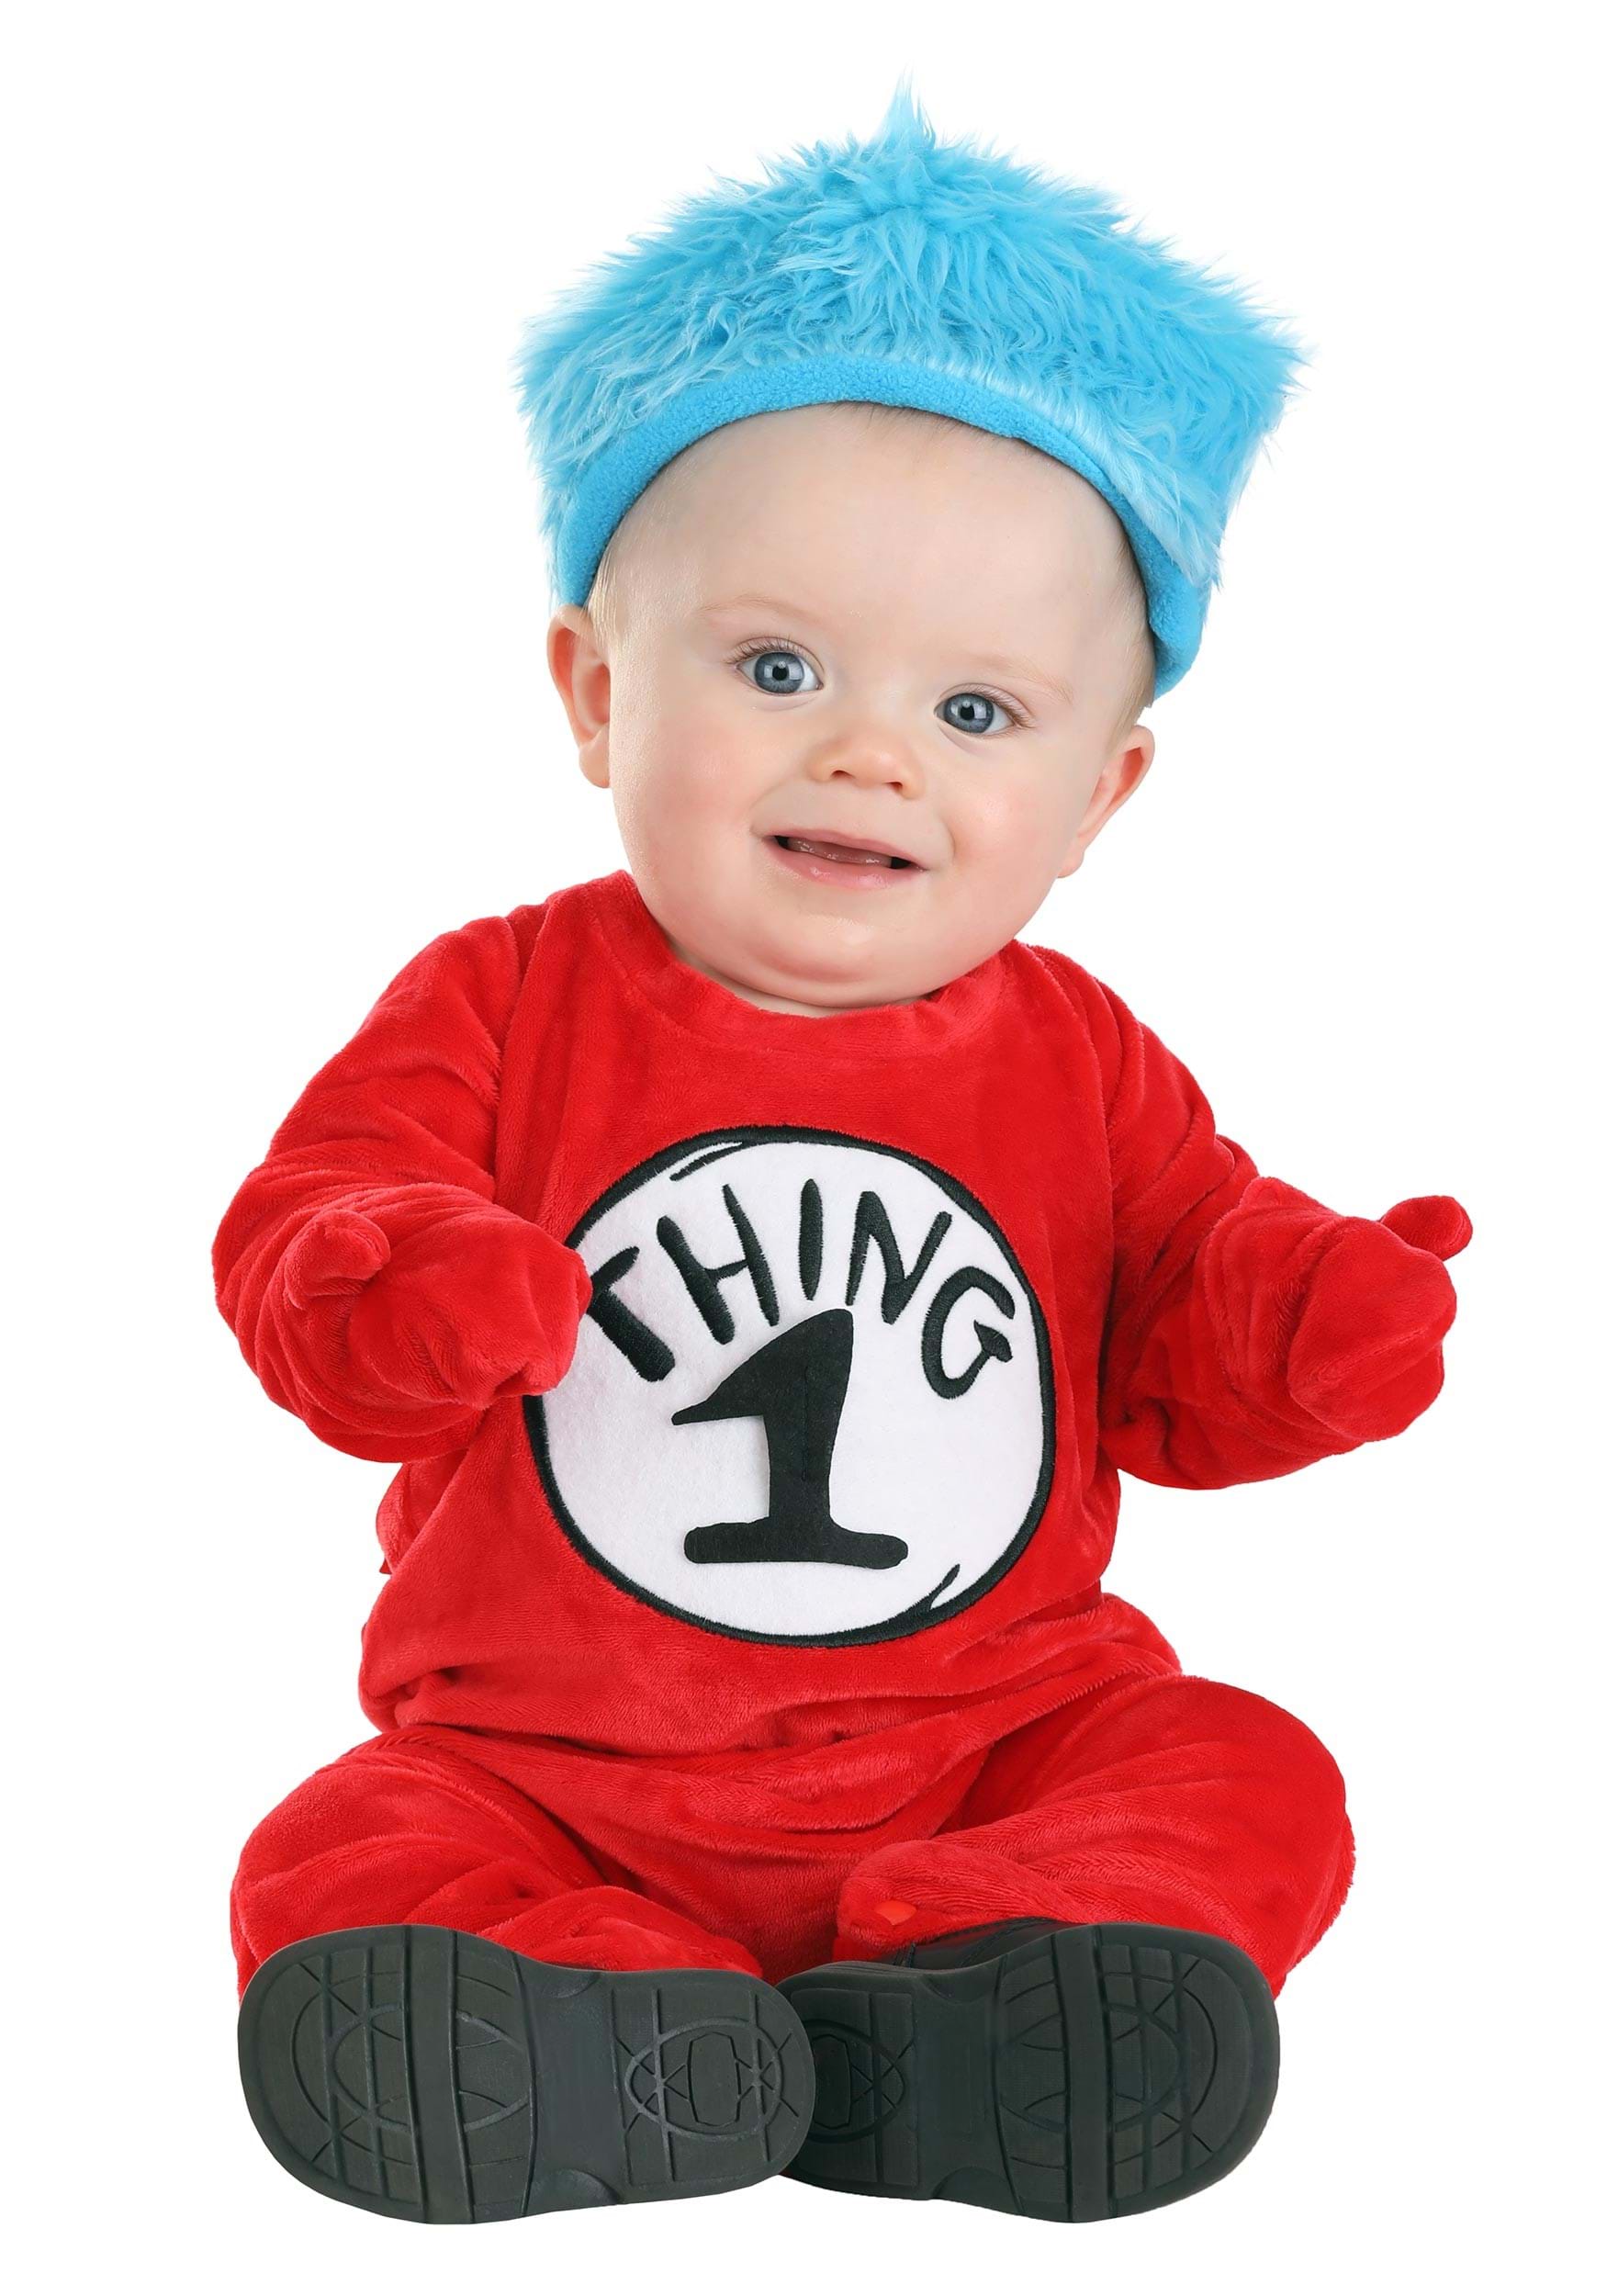 Photos - Fancy Dress A&D FUN Costumes Dr. Seuss Thing 1 & 2 Costume for Infants Red/Blue/Wh 